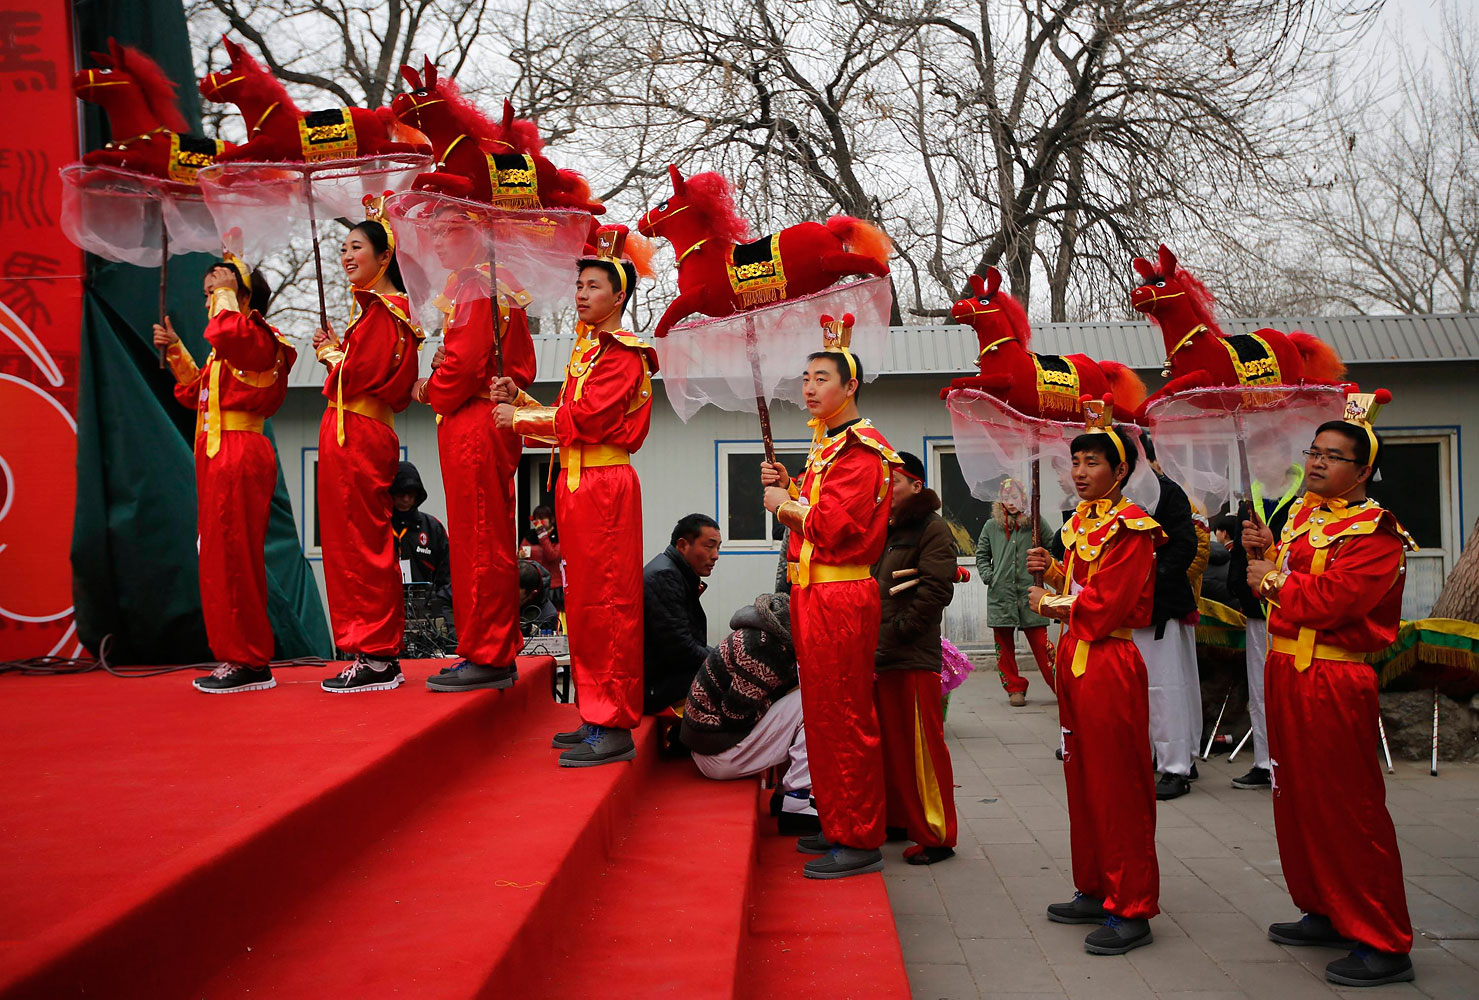 Folk dancers hold horse models as they prepare to take part in a traditional horse dance on the first day of the Chinese Lunar New Year, which welcomes the Year of the Horse, at the Longtan park in Beijing Jan. 31, 2014.